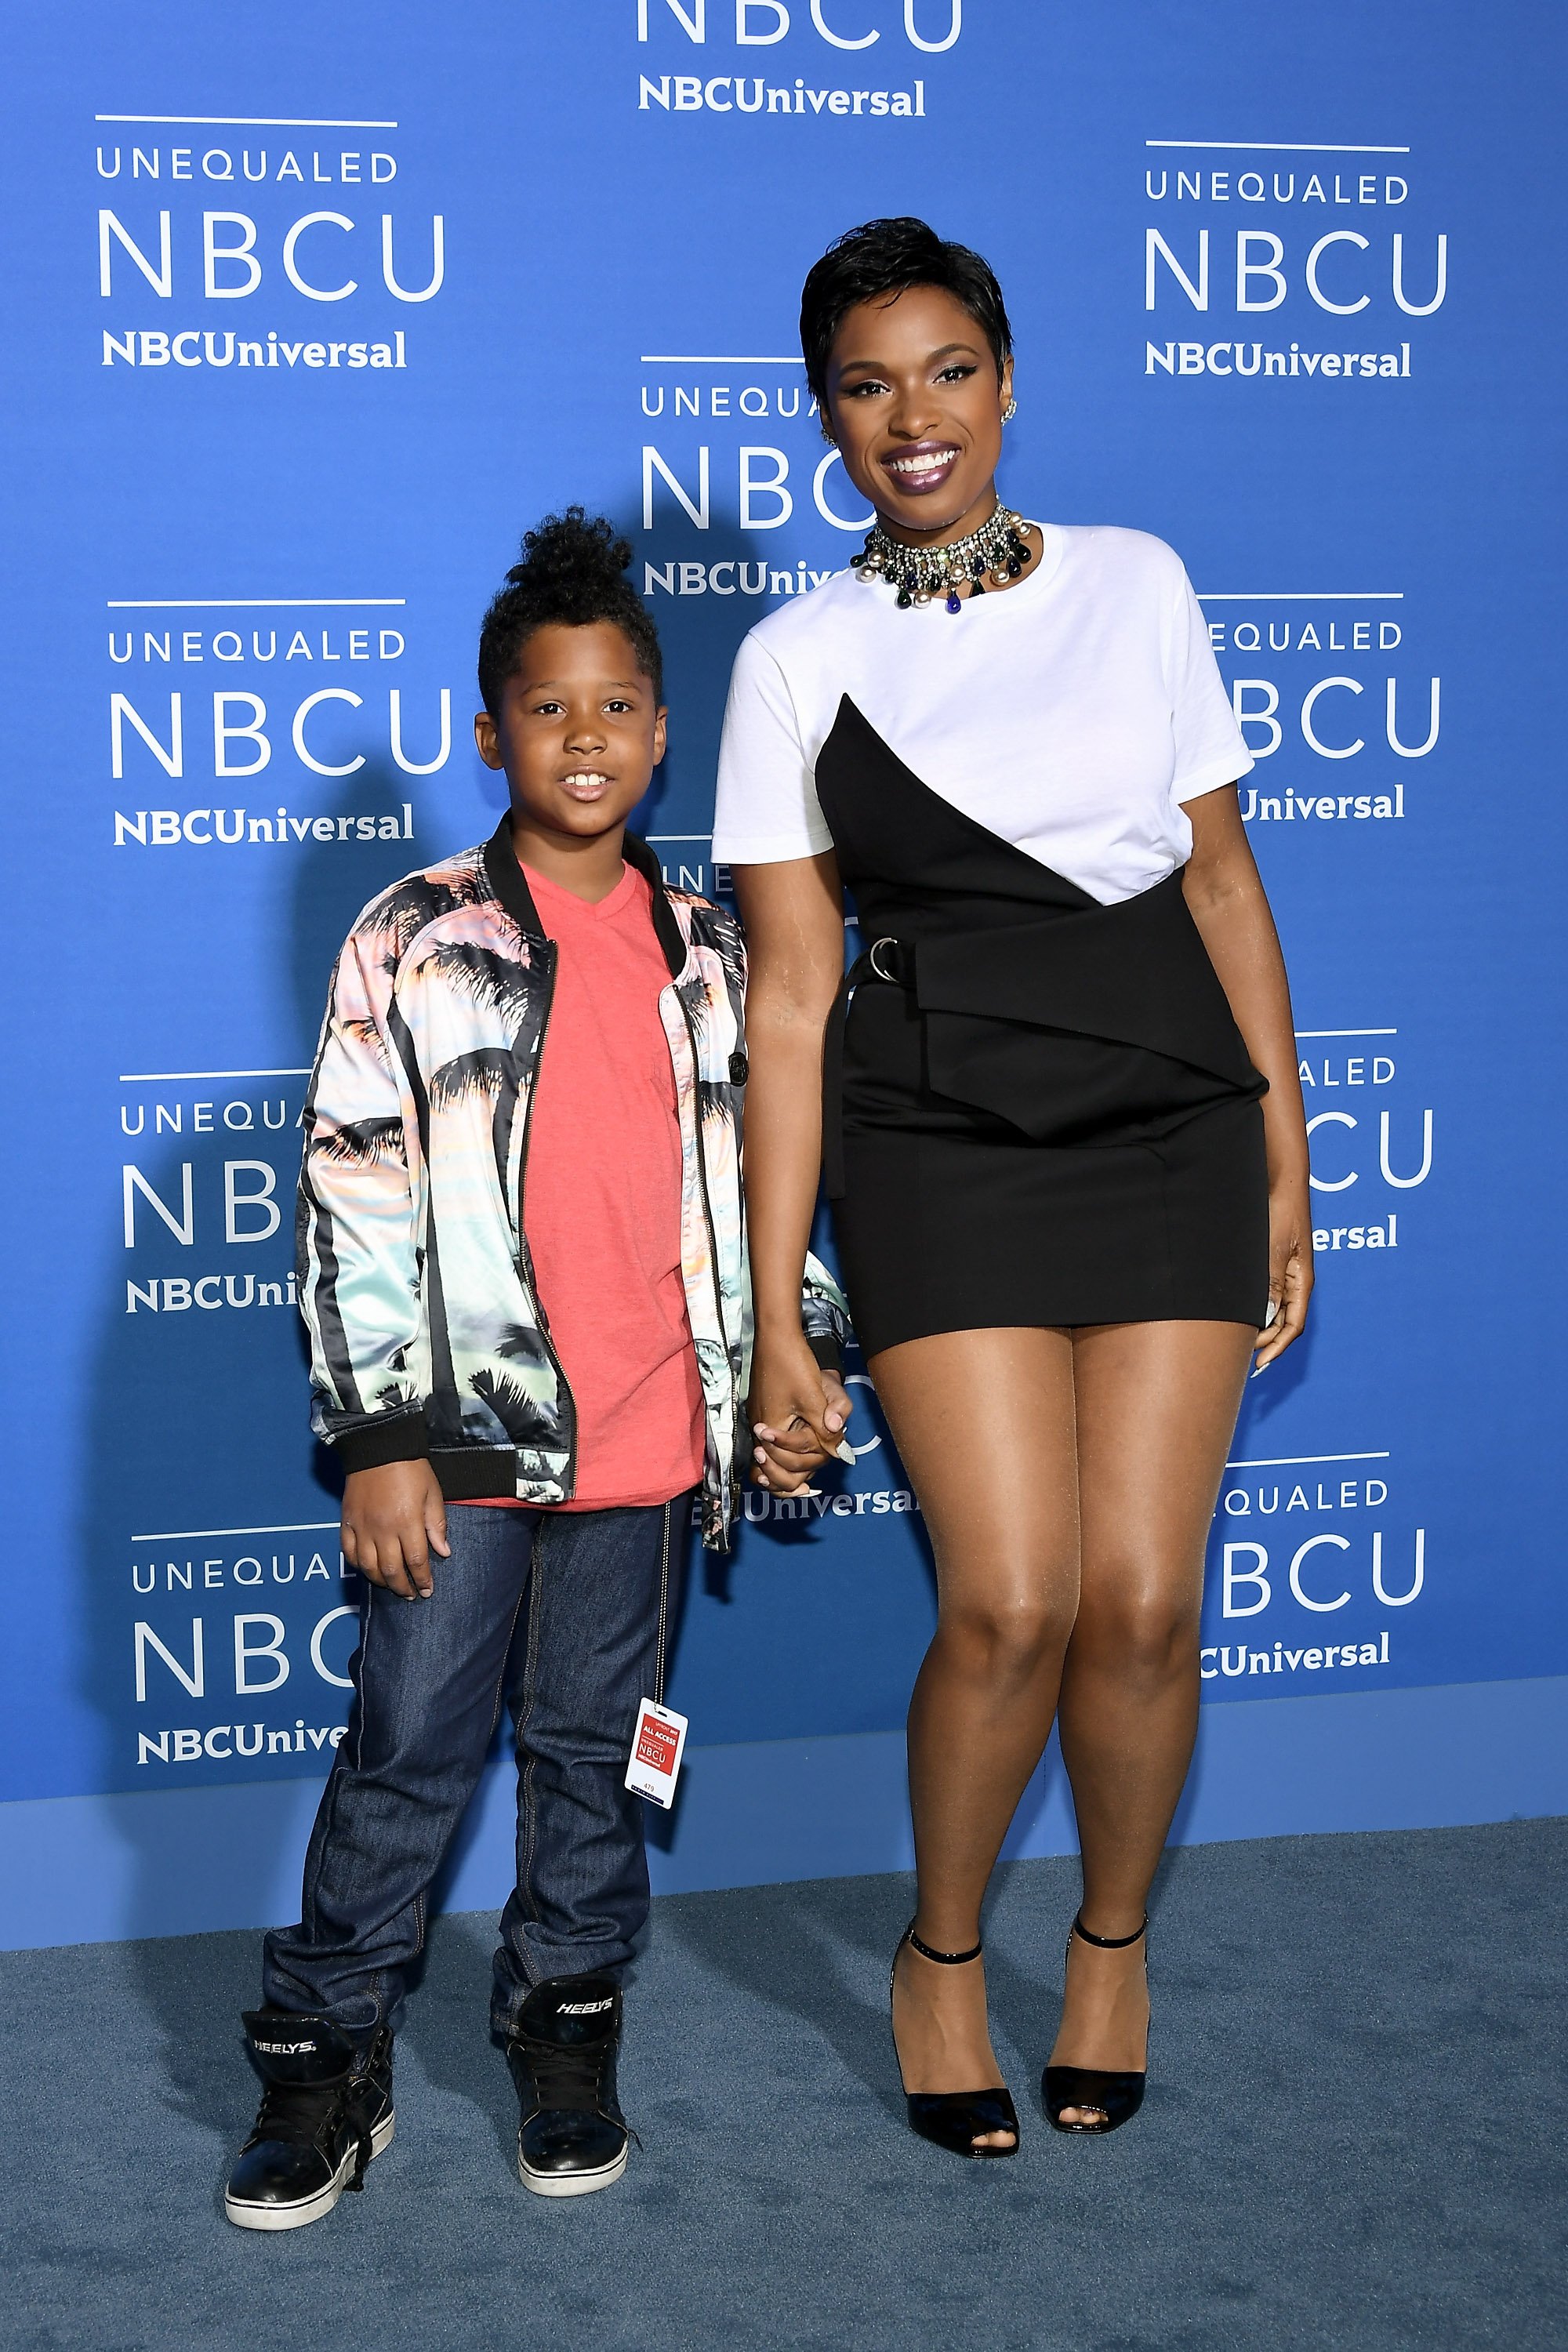 Jennifer Hudson and son David Otunga Jr. attend the 2017 NBCUniversal Upfront at Radio City Music Hall on May 15, 2017 in New York City | Photo: GettyImages